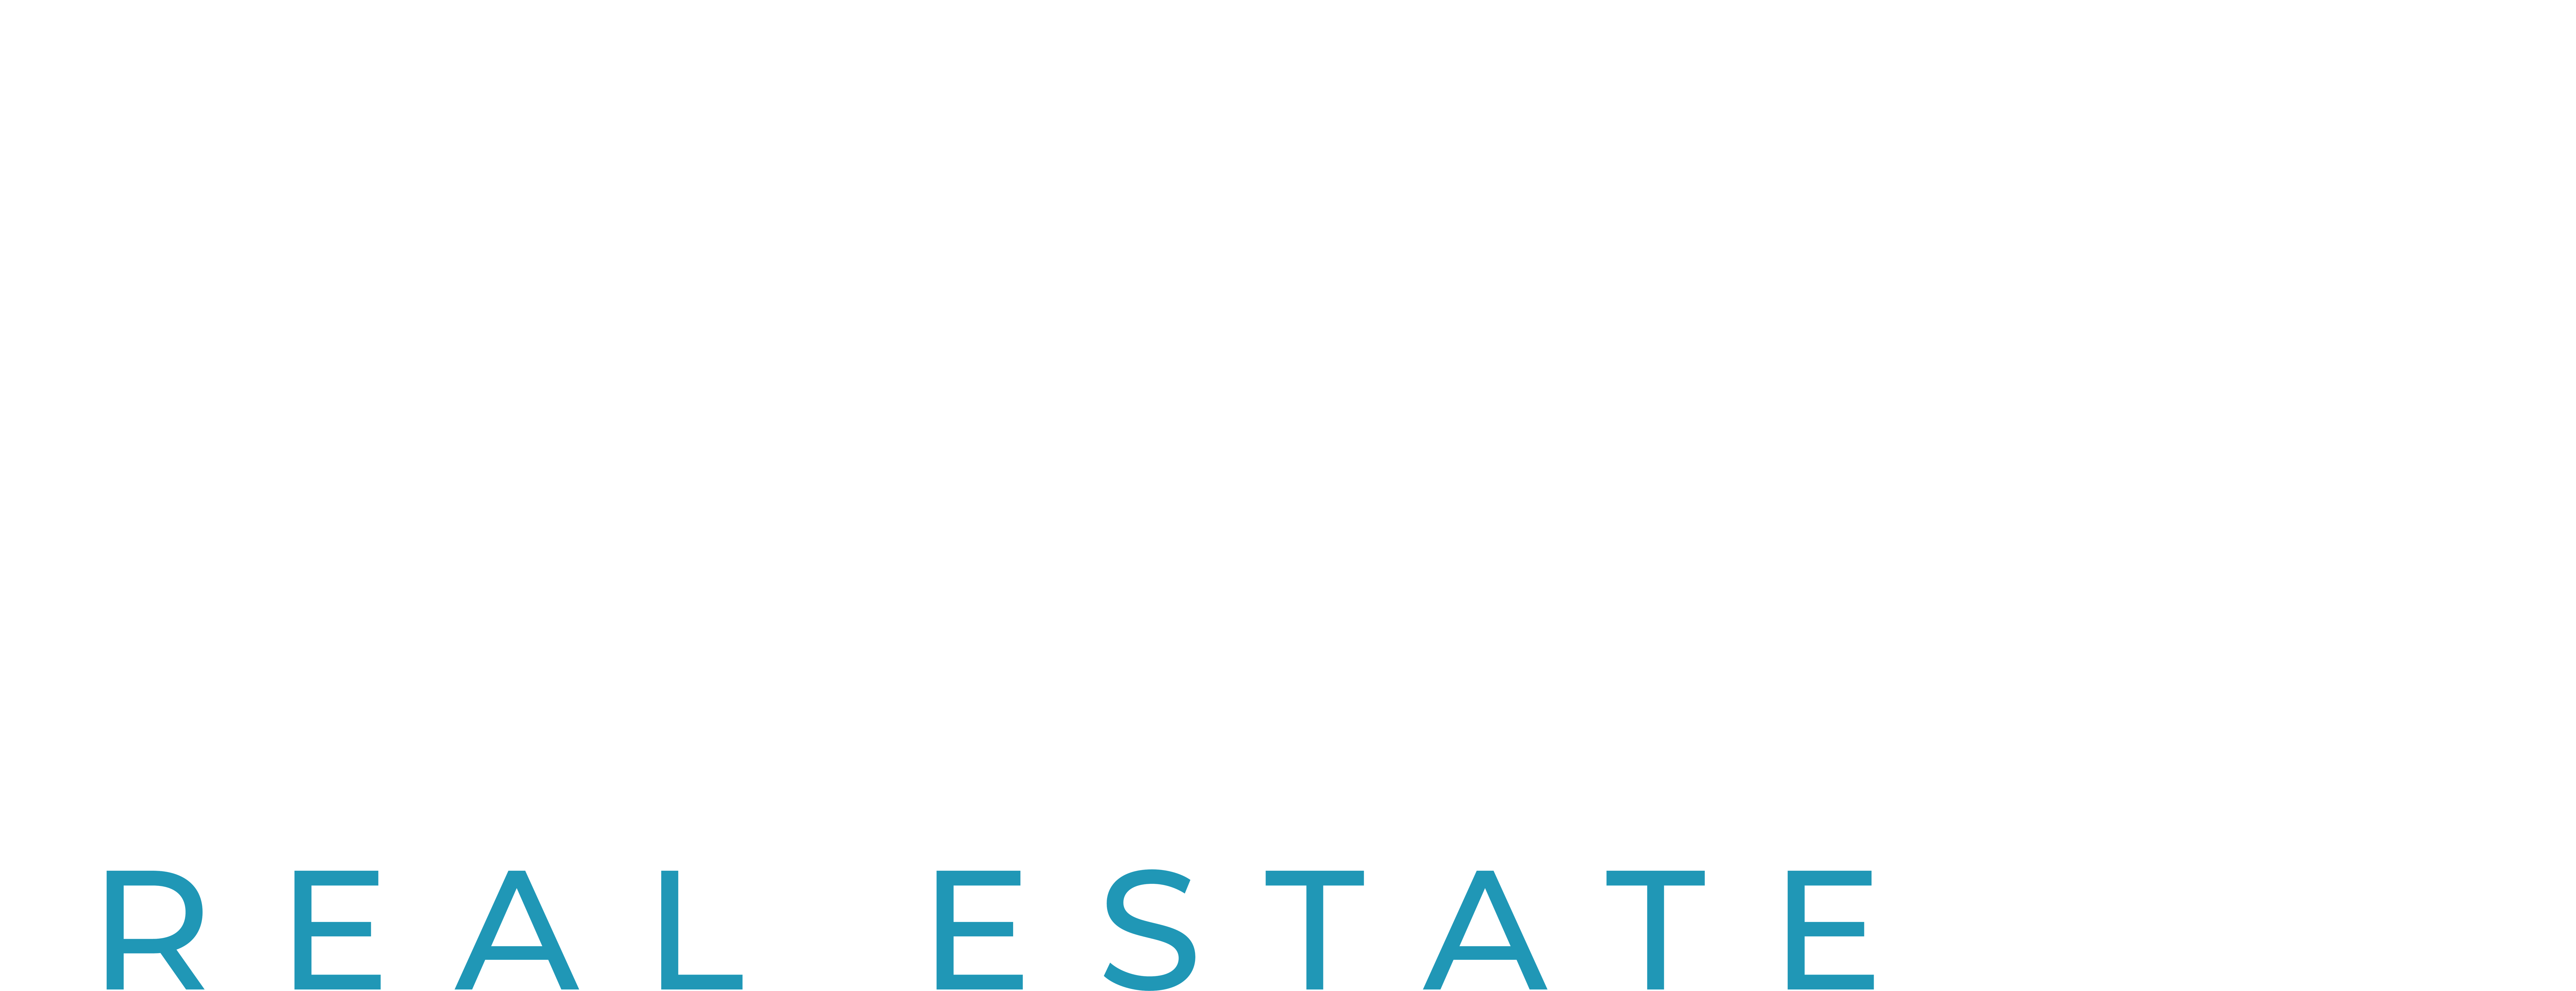 Real Estate Agency Airey Real Estate - CLAREMONT